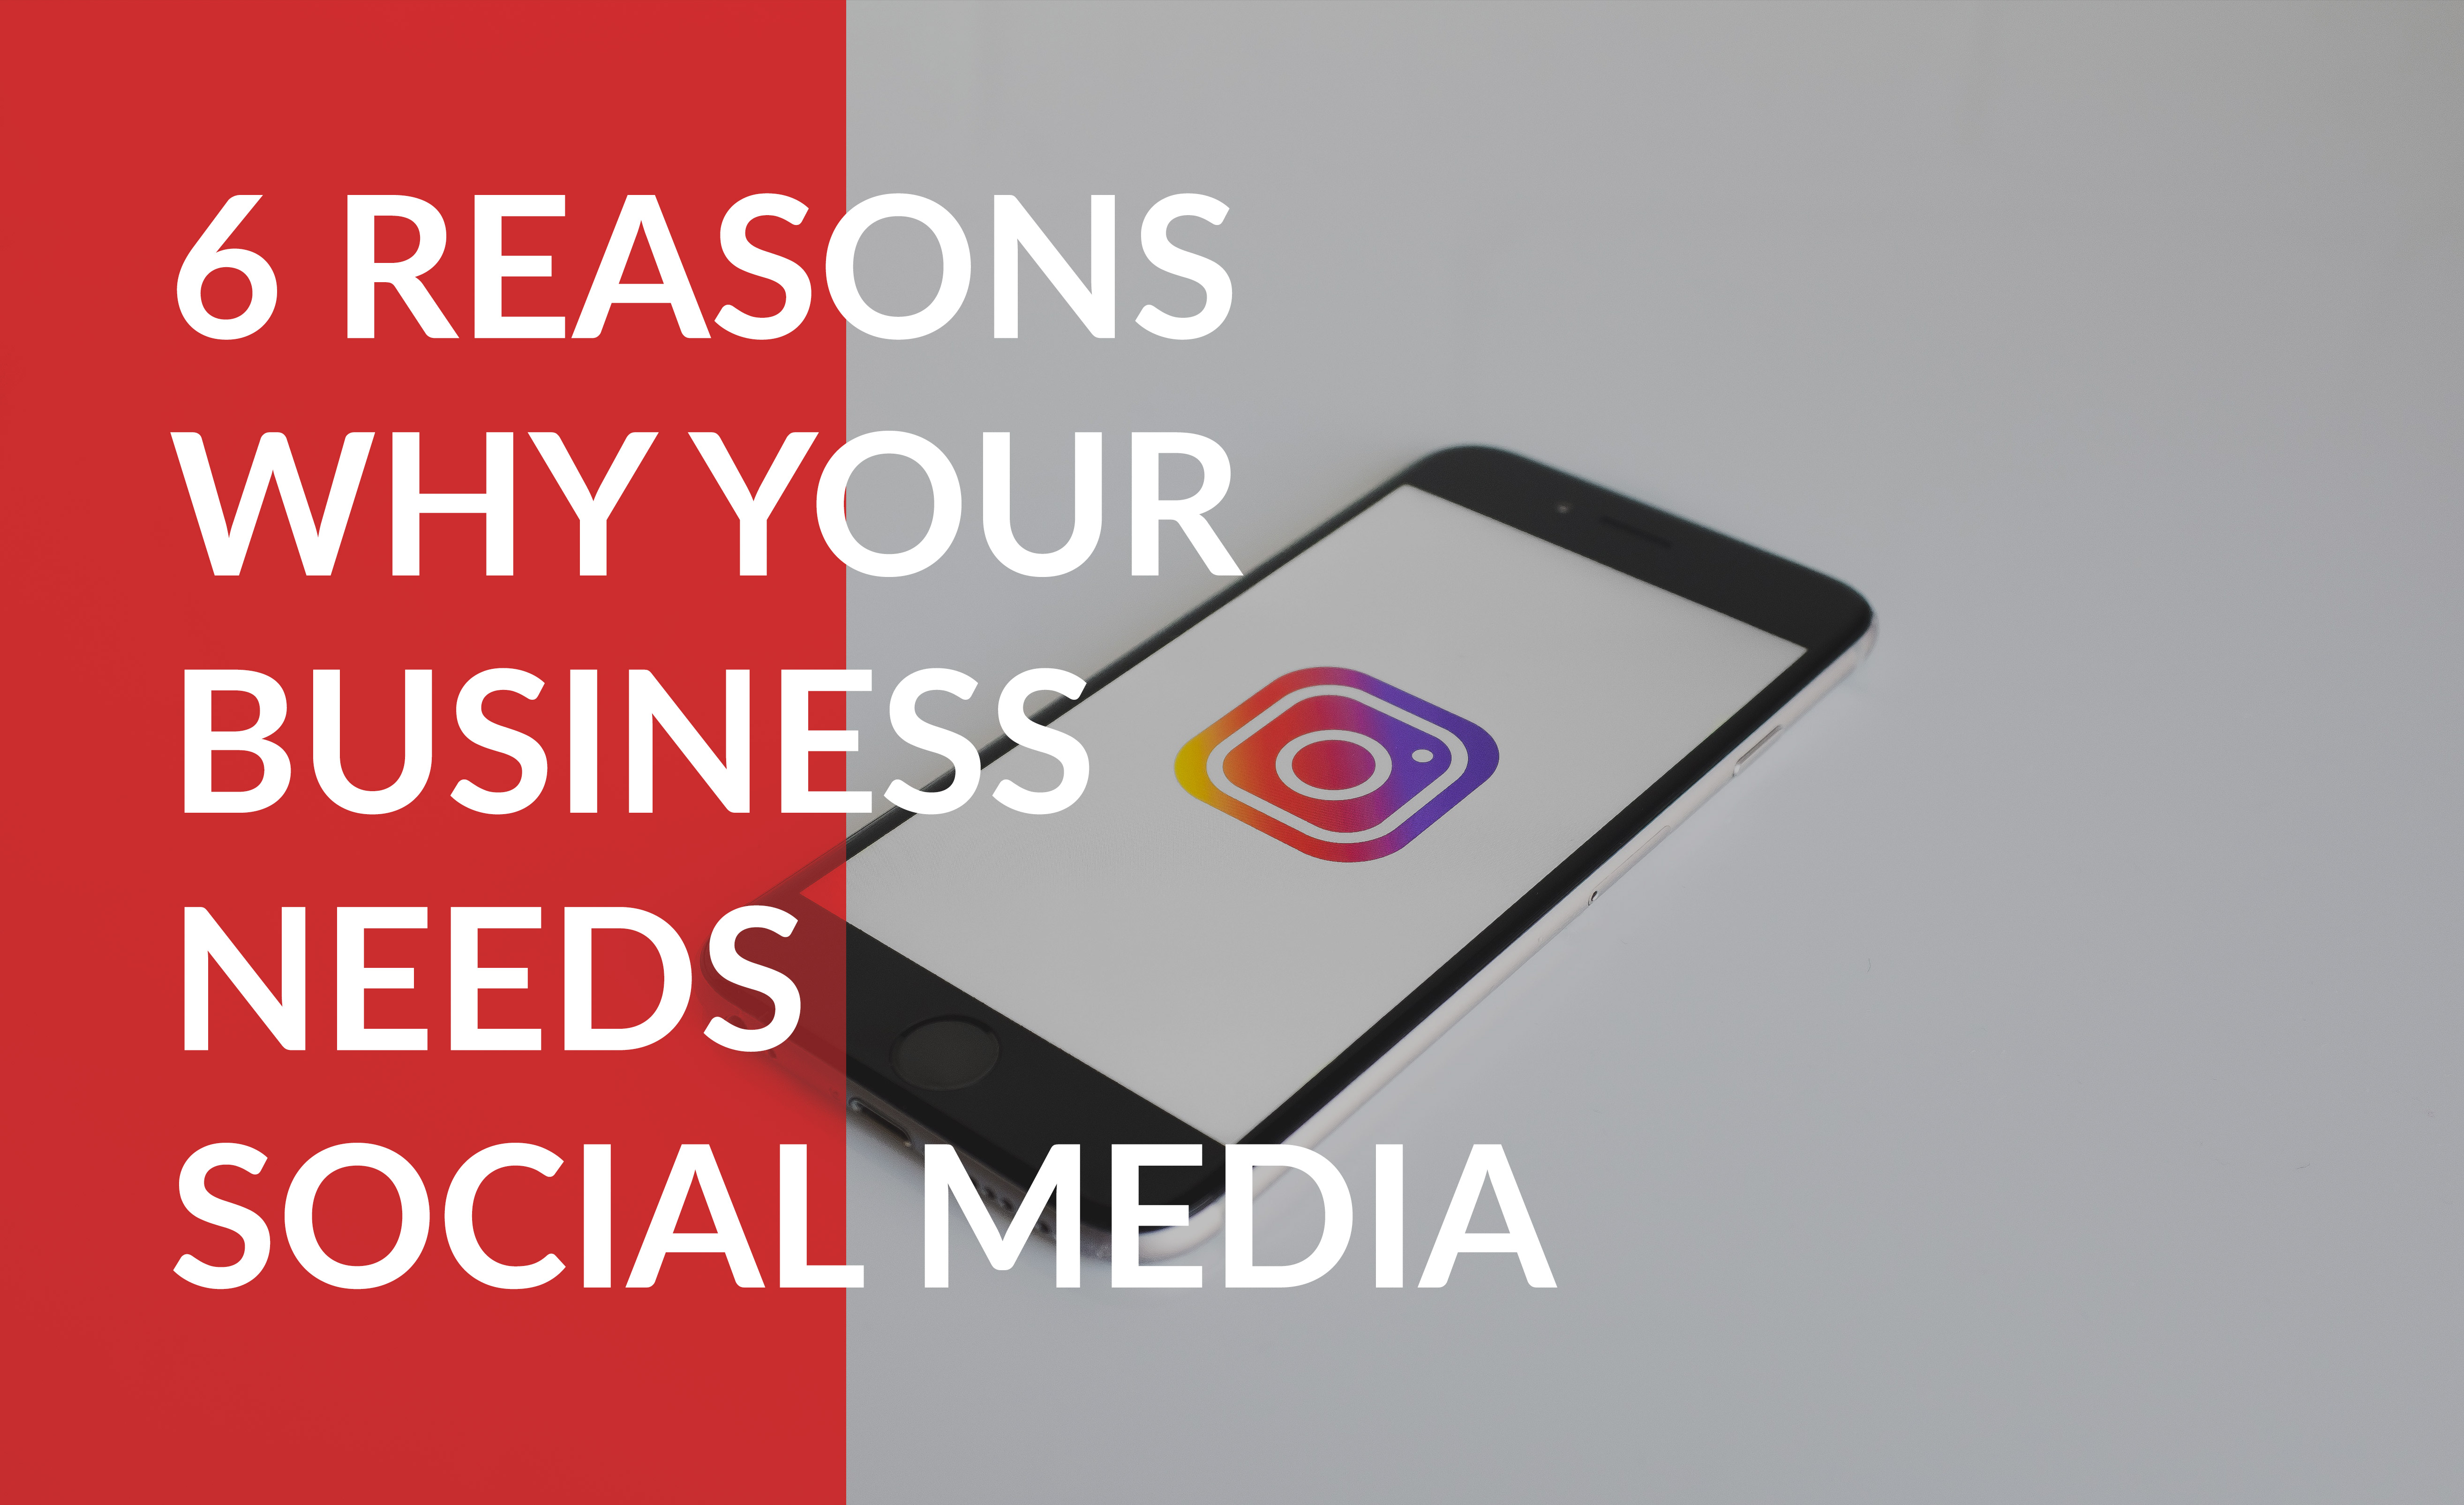 6 reasons why your business needs social media